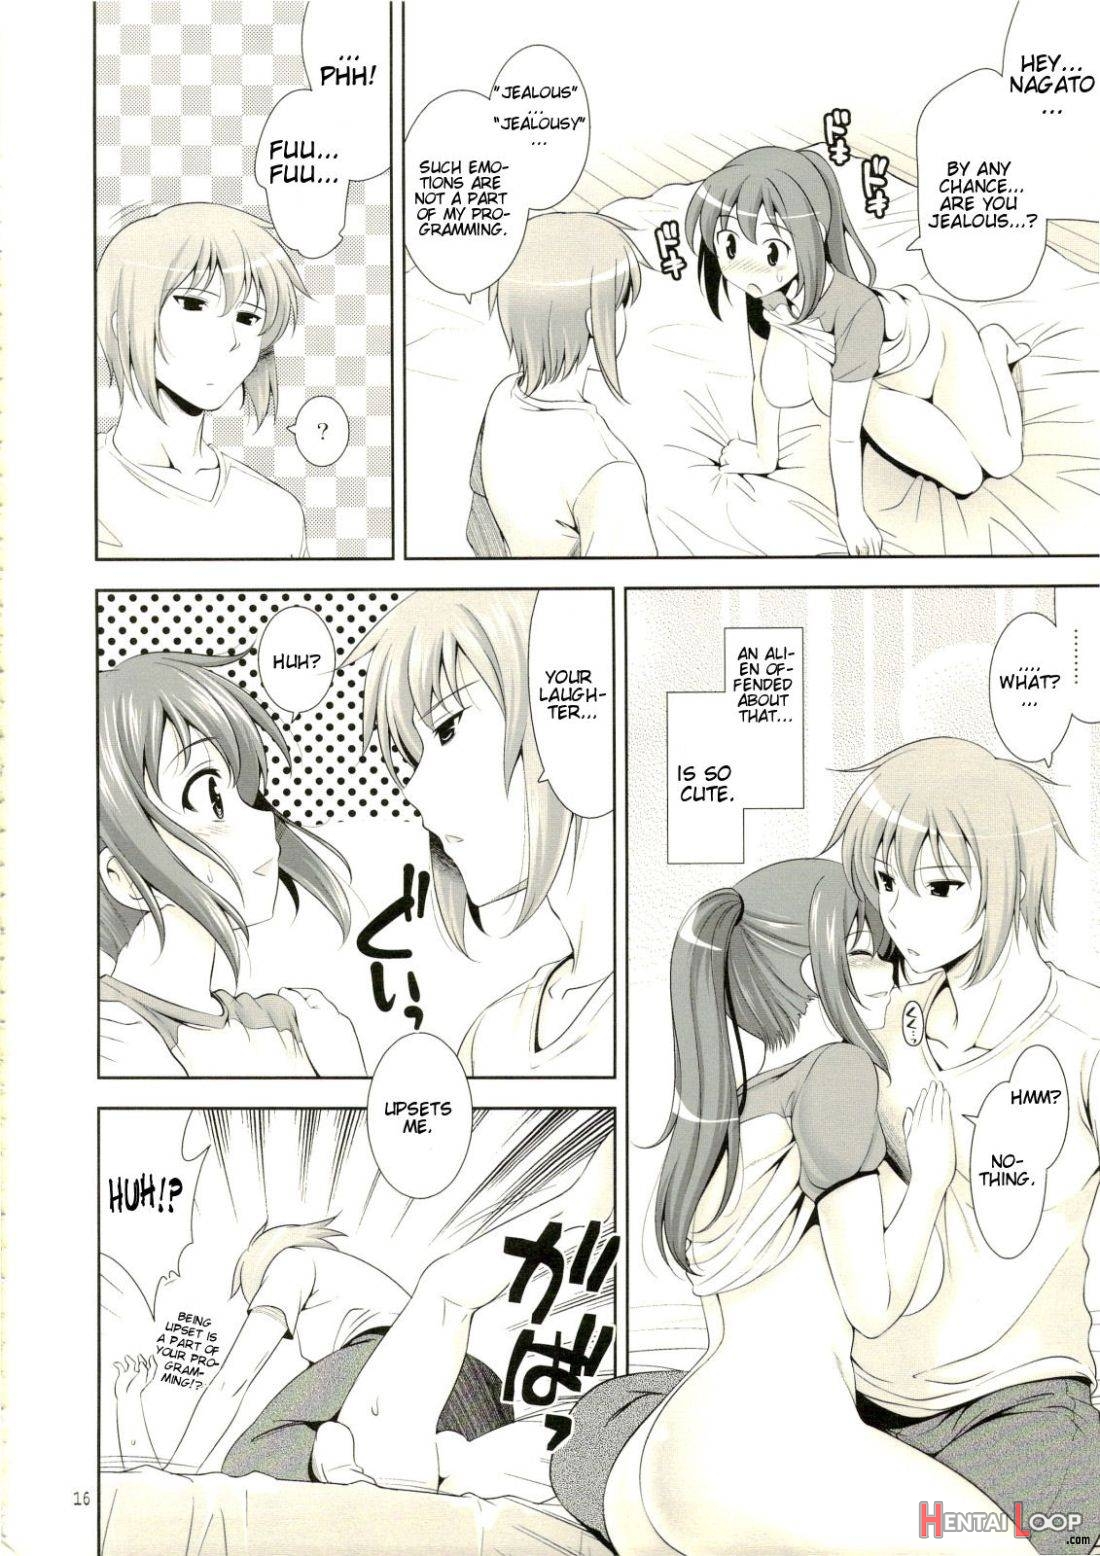 Manatsu no Yo no Yume no Mata Yume no Mata Yume page 13